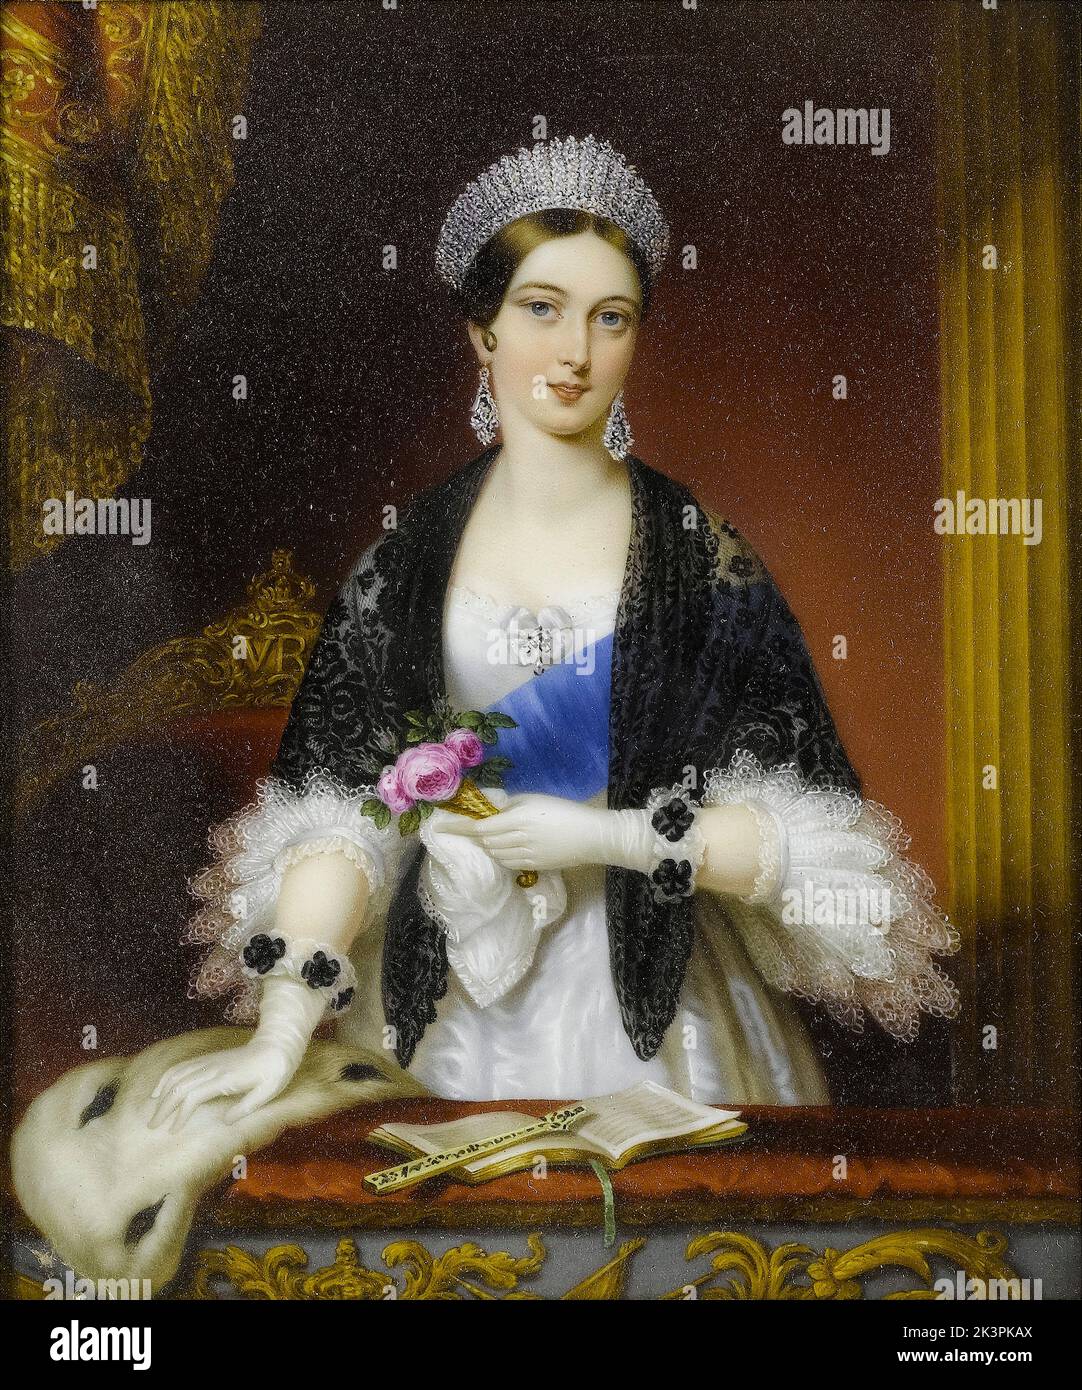 Queen Victoria (1819-1901), Queen of Great Britain and Ireland (1837-1901) at the Theatre, portrait miniature on porcelain by Sophie Liénard after Edmund Thomas Parris, 1842-1845 Stock Photo